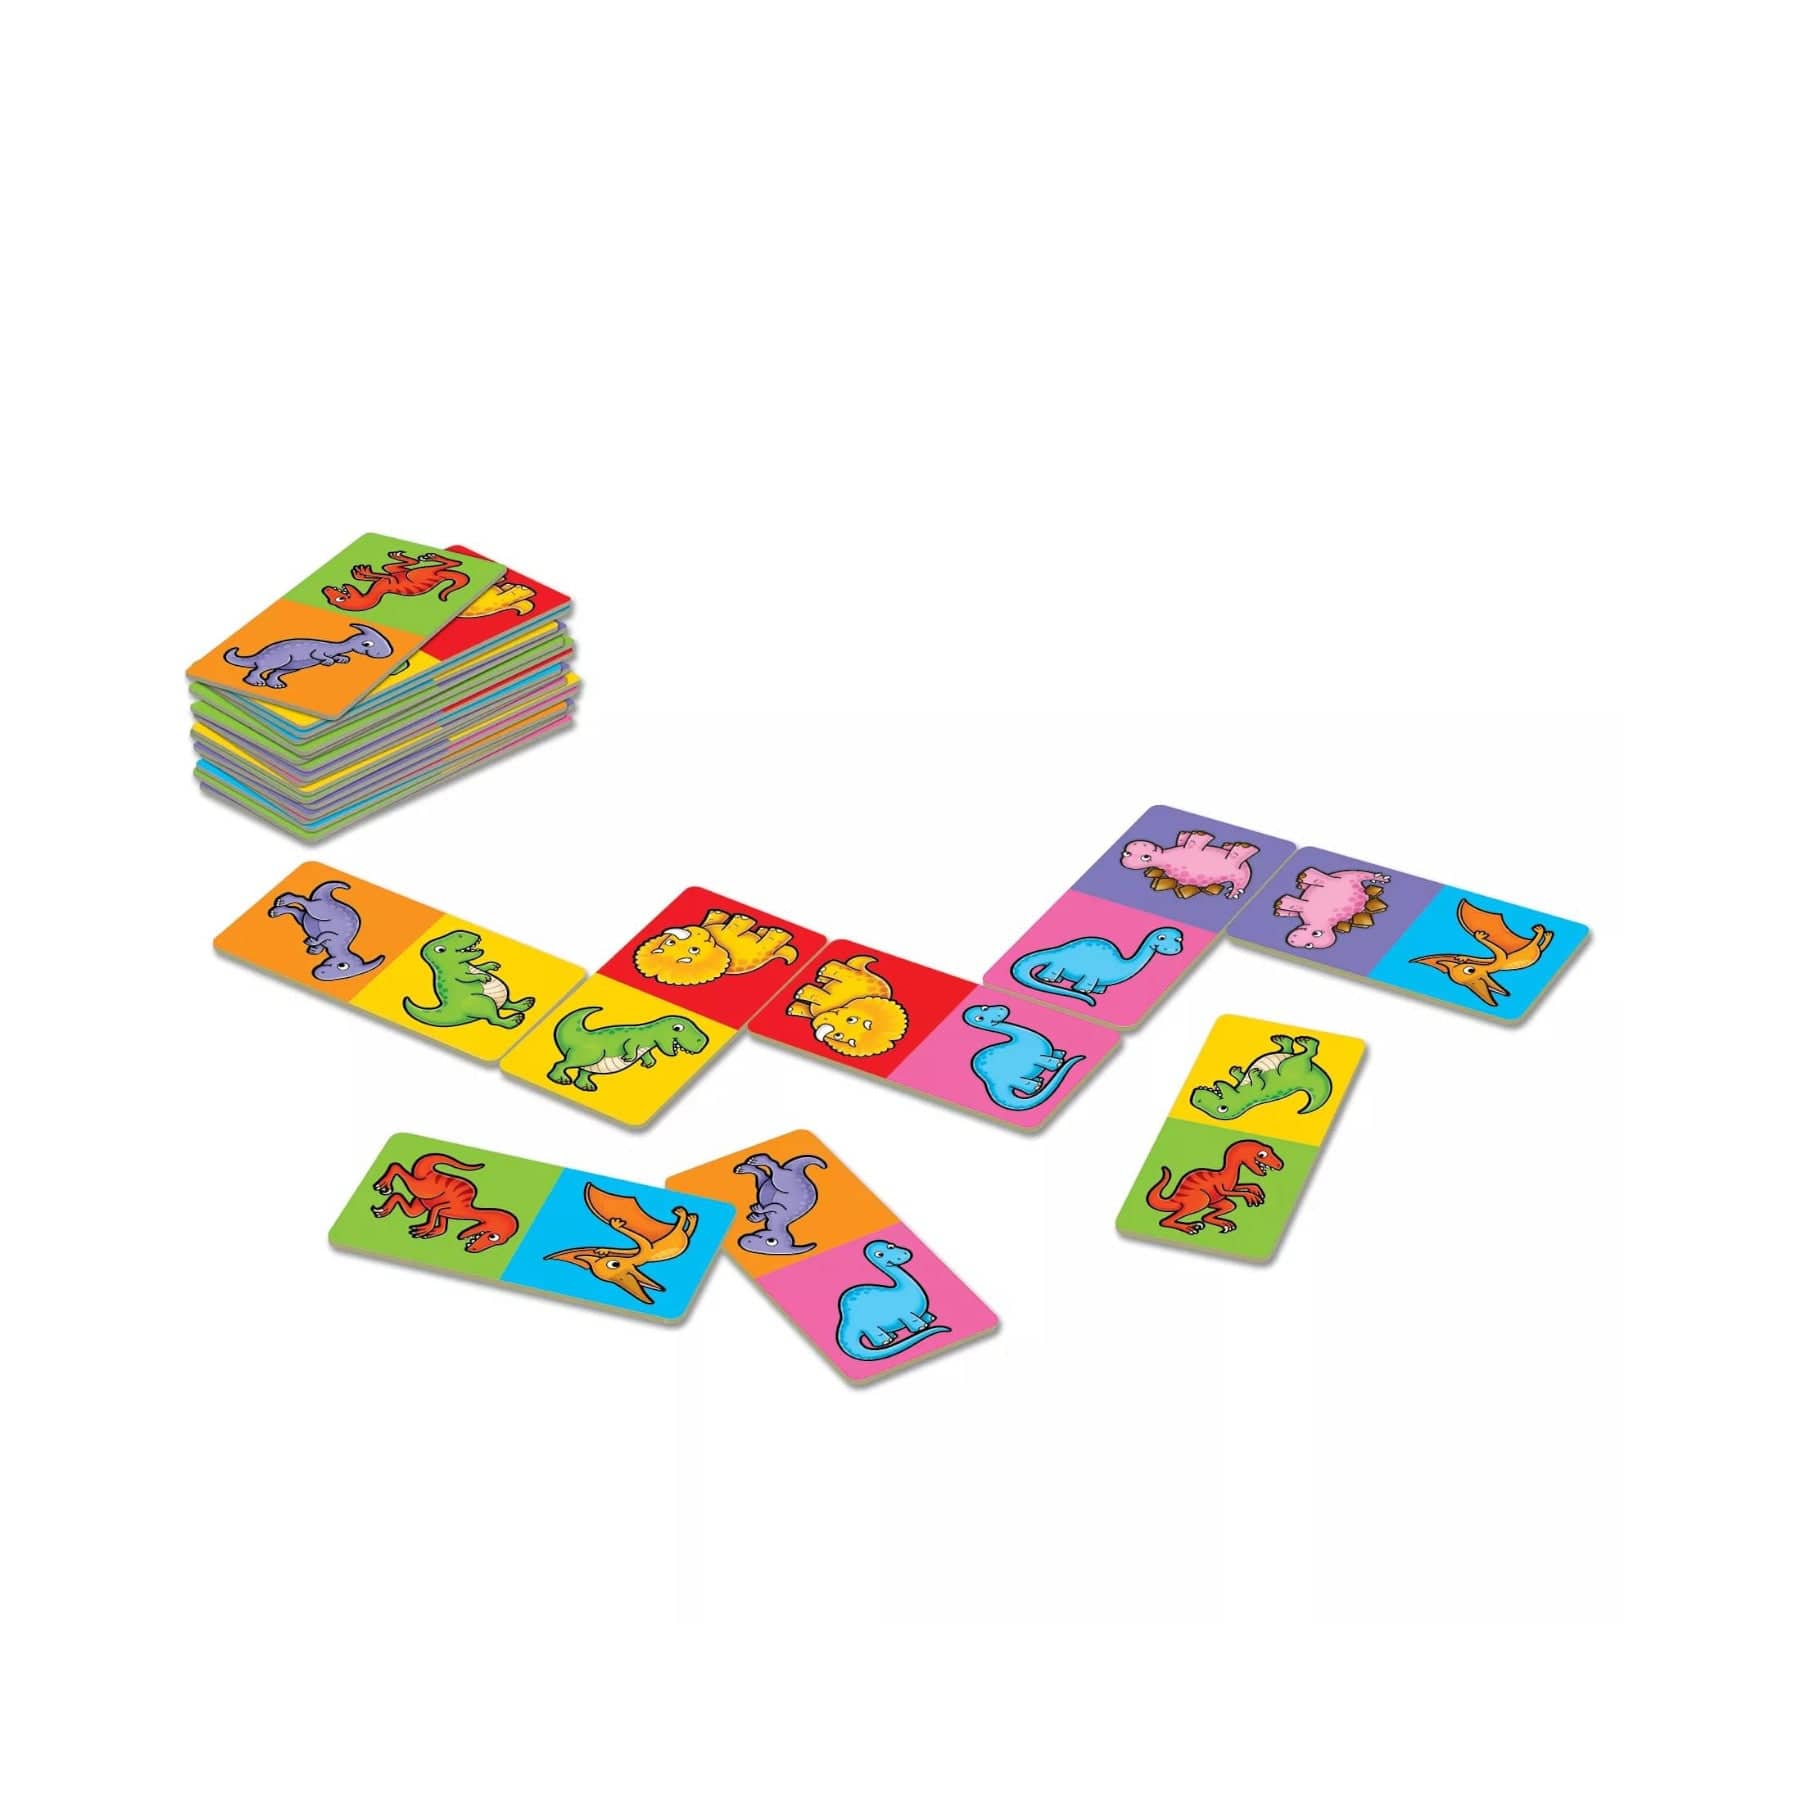 Colorful dinosaur illustrations on memory game cards spread out on white background with a stack of game cards to the side